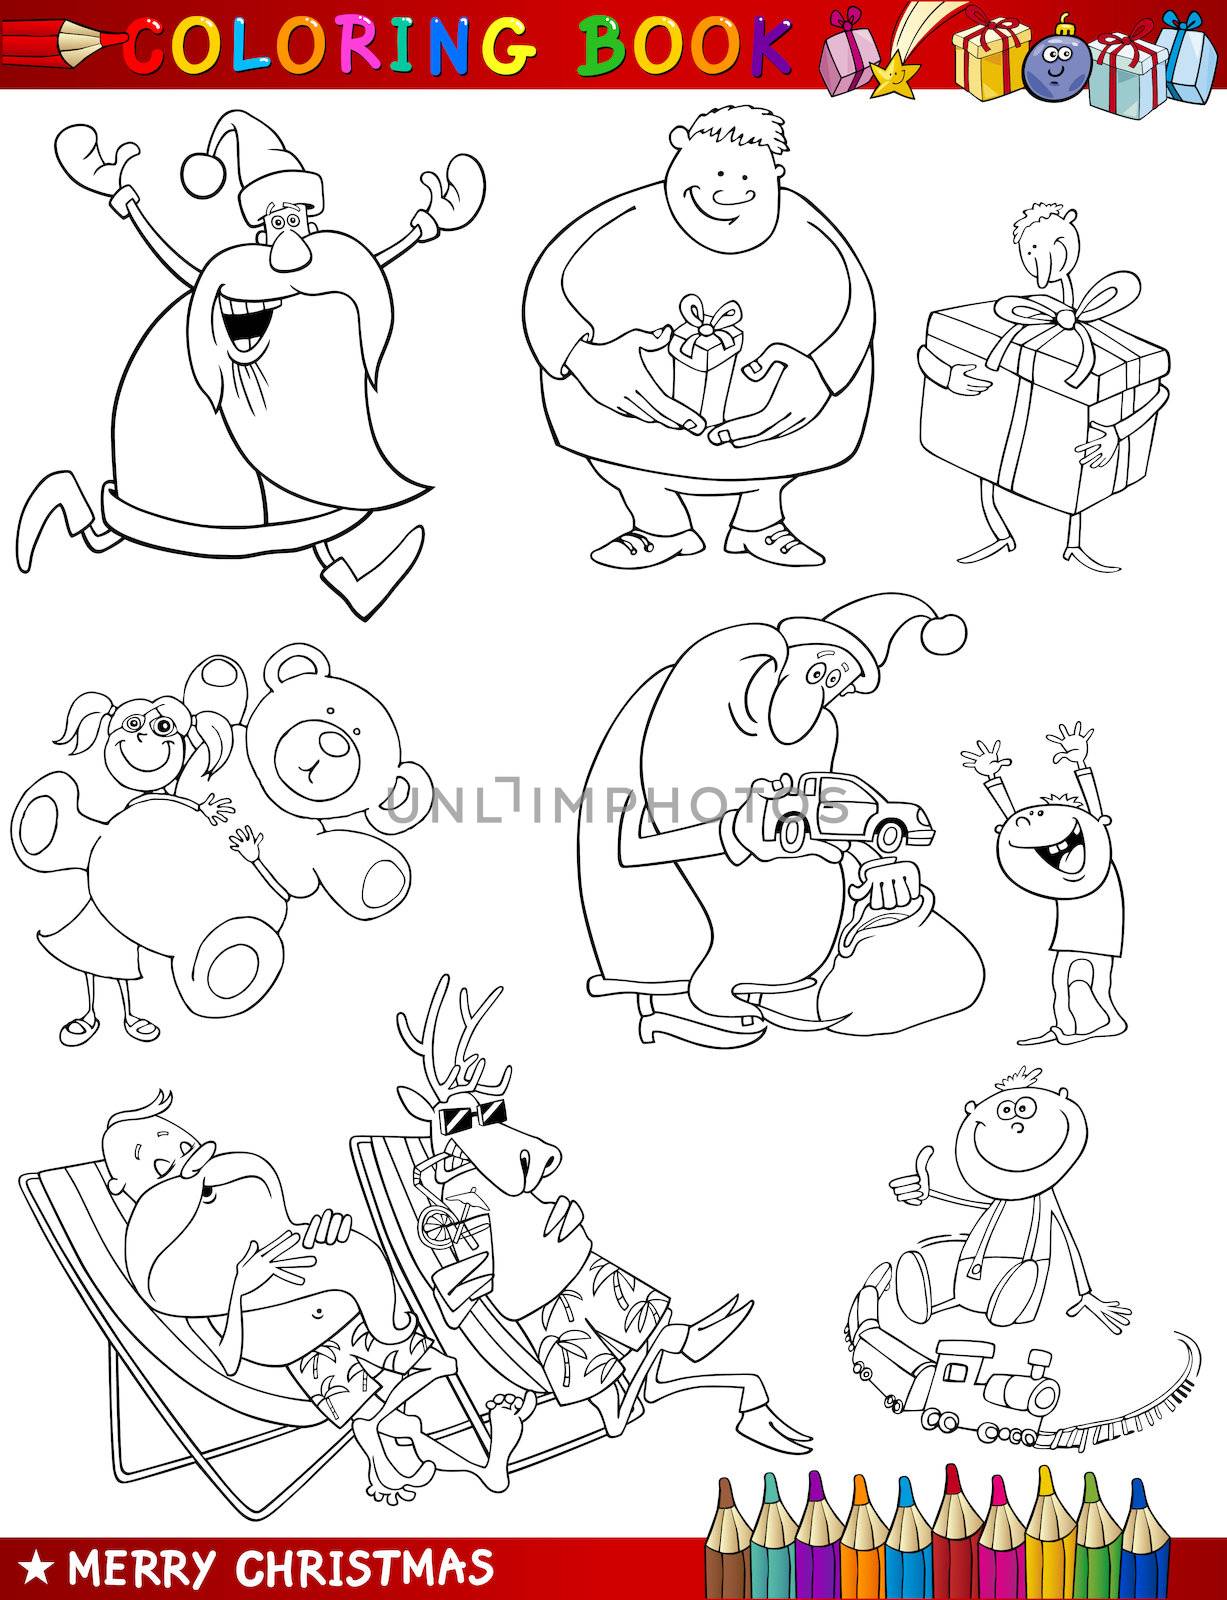 Coloring Book or Page Cartoon Illustration of Christmas Themes with Santa Claus and Xmas Presents for Children